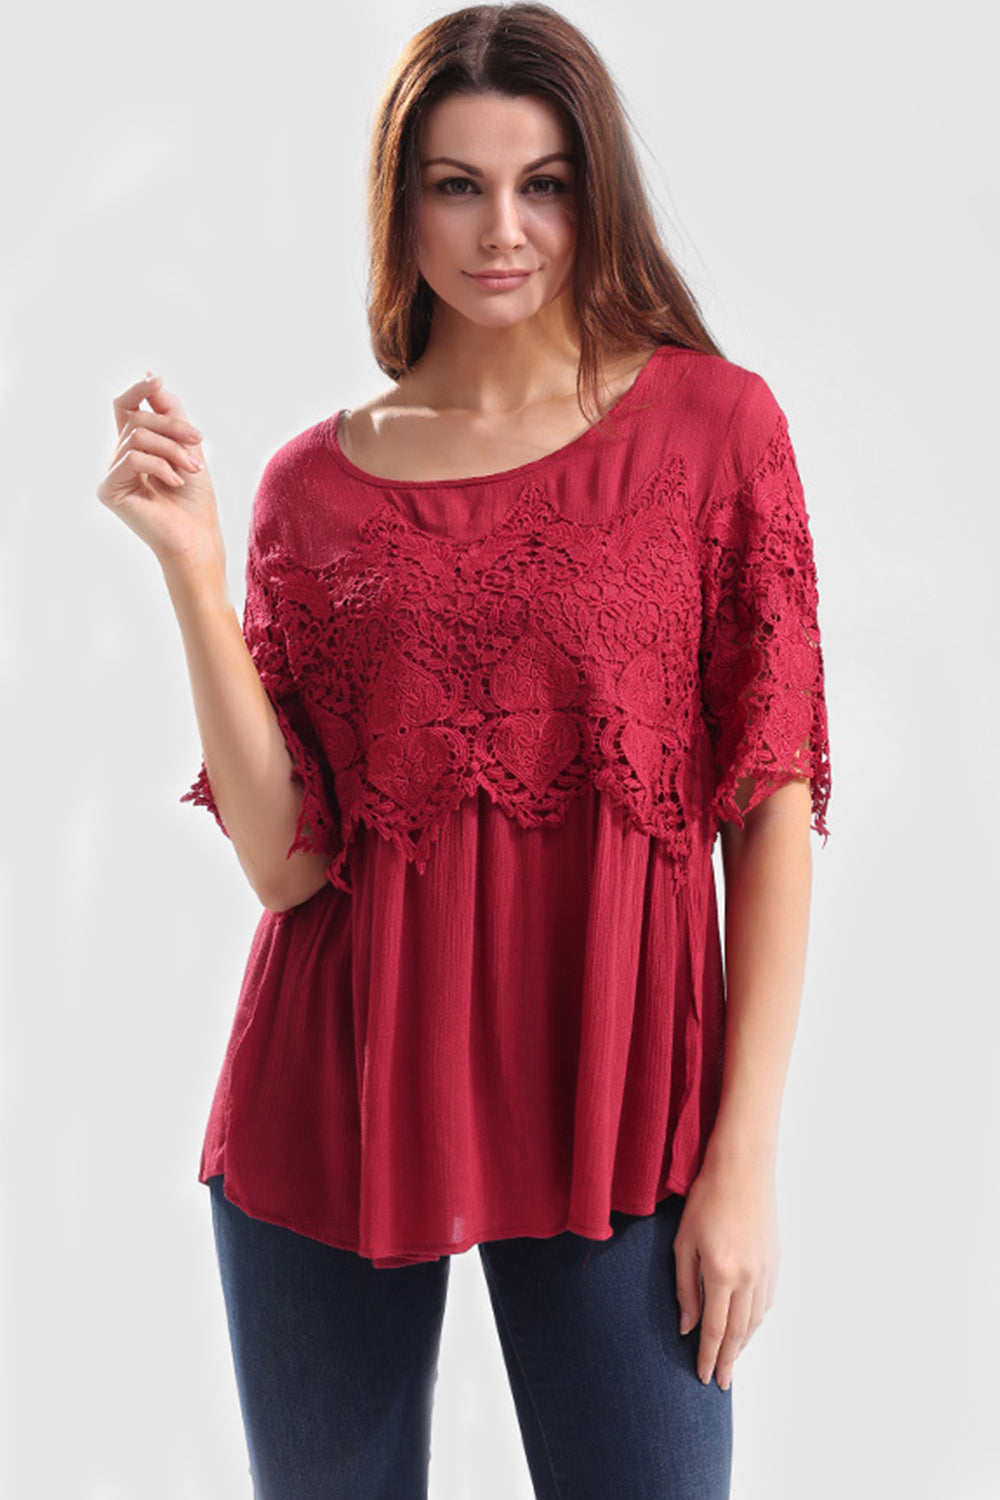 Ketty More Women Short Sleeves Front And Back Lace Loose Top-KMWSB985